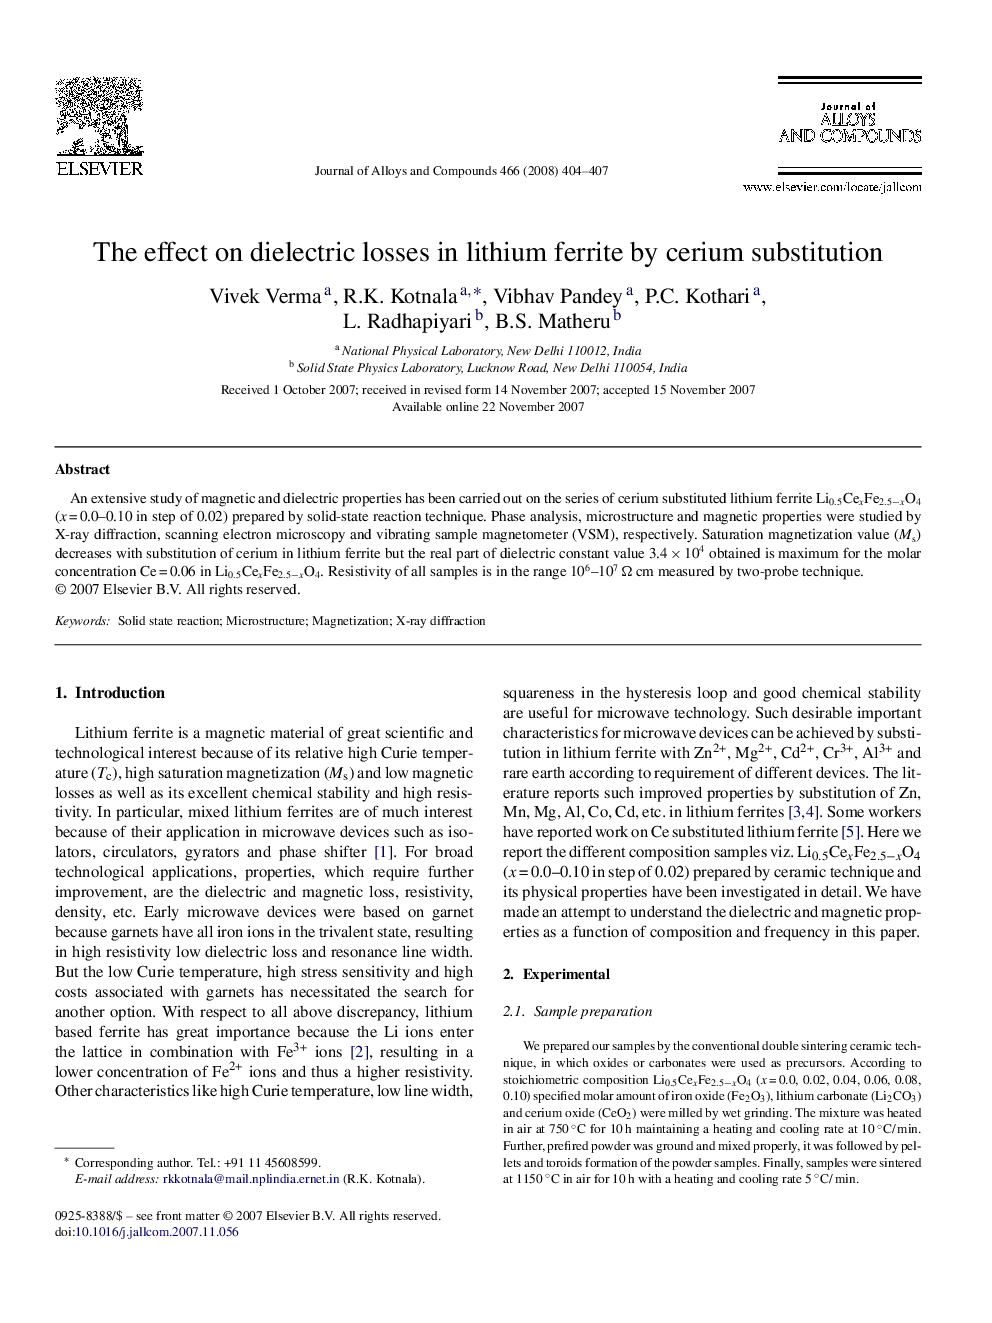 The effect on dielectric losses in lithium ferrite by cerium substitution